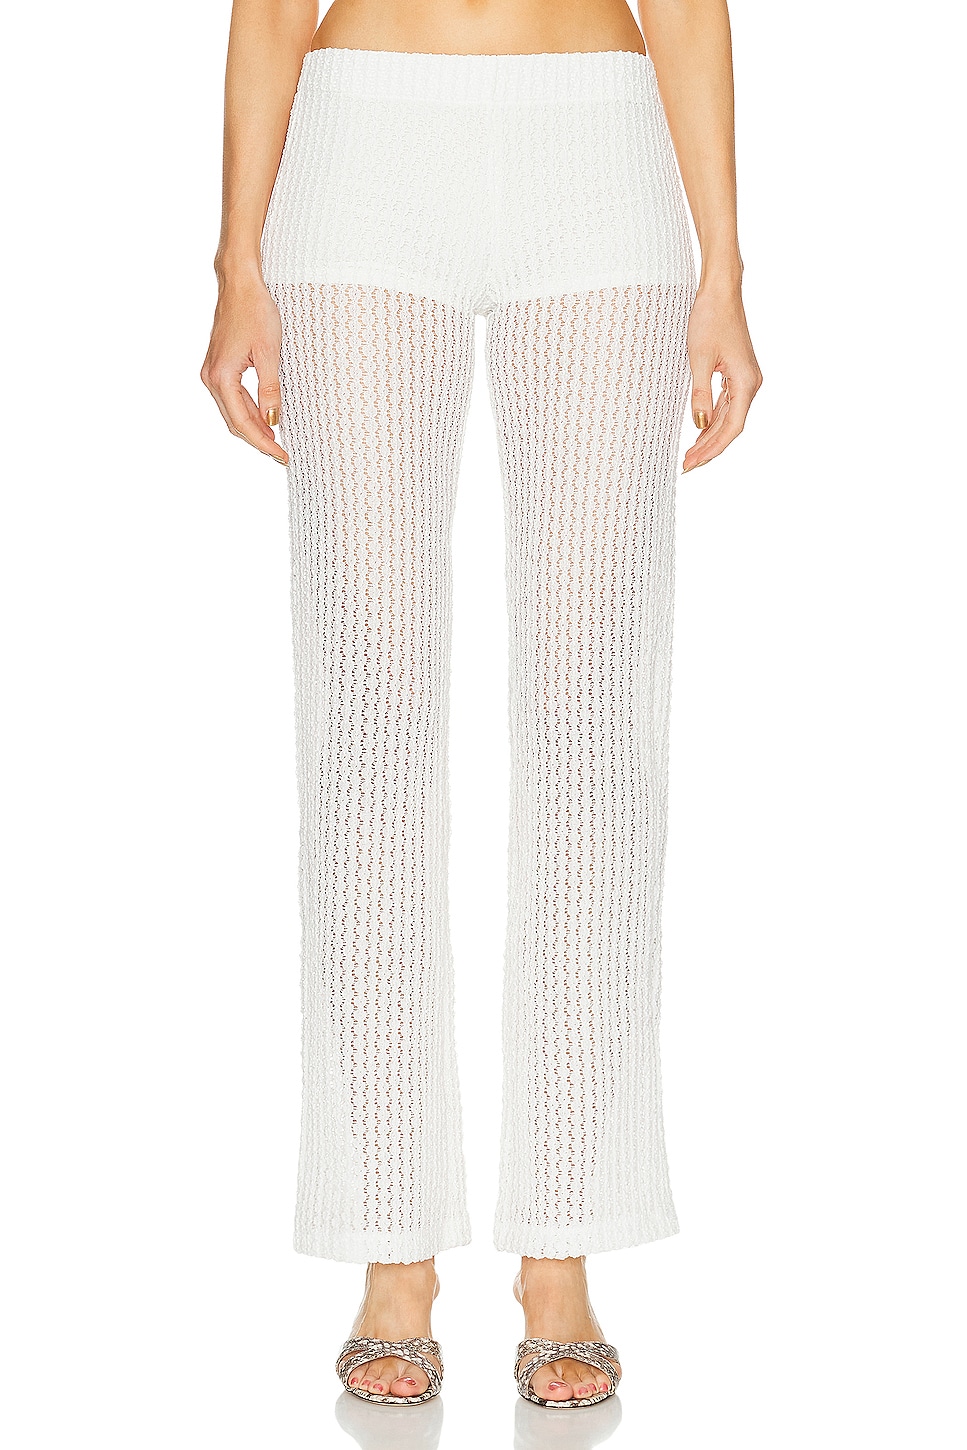 Image 1 of SIEDRES Sely Textured Low Rise Pant in White